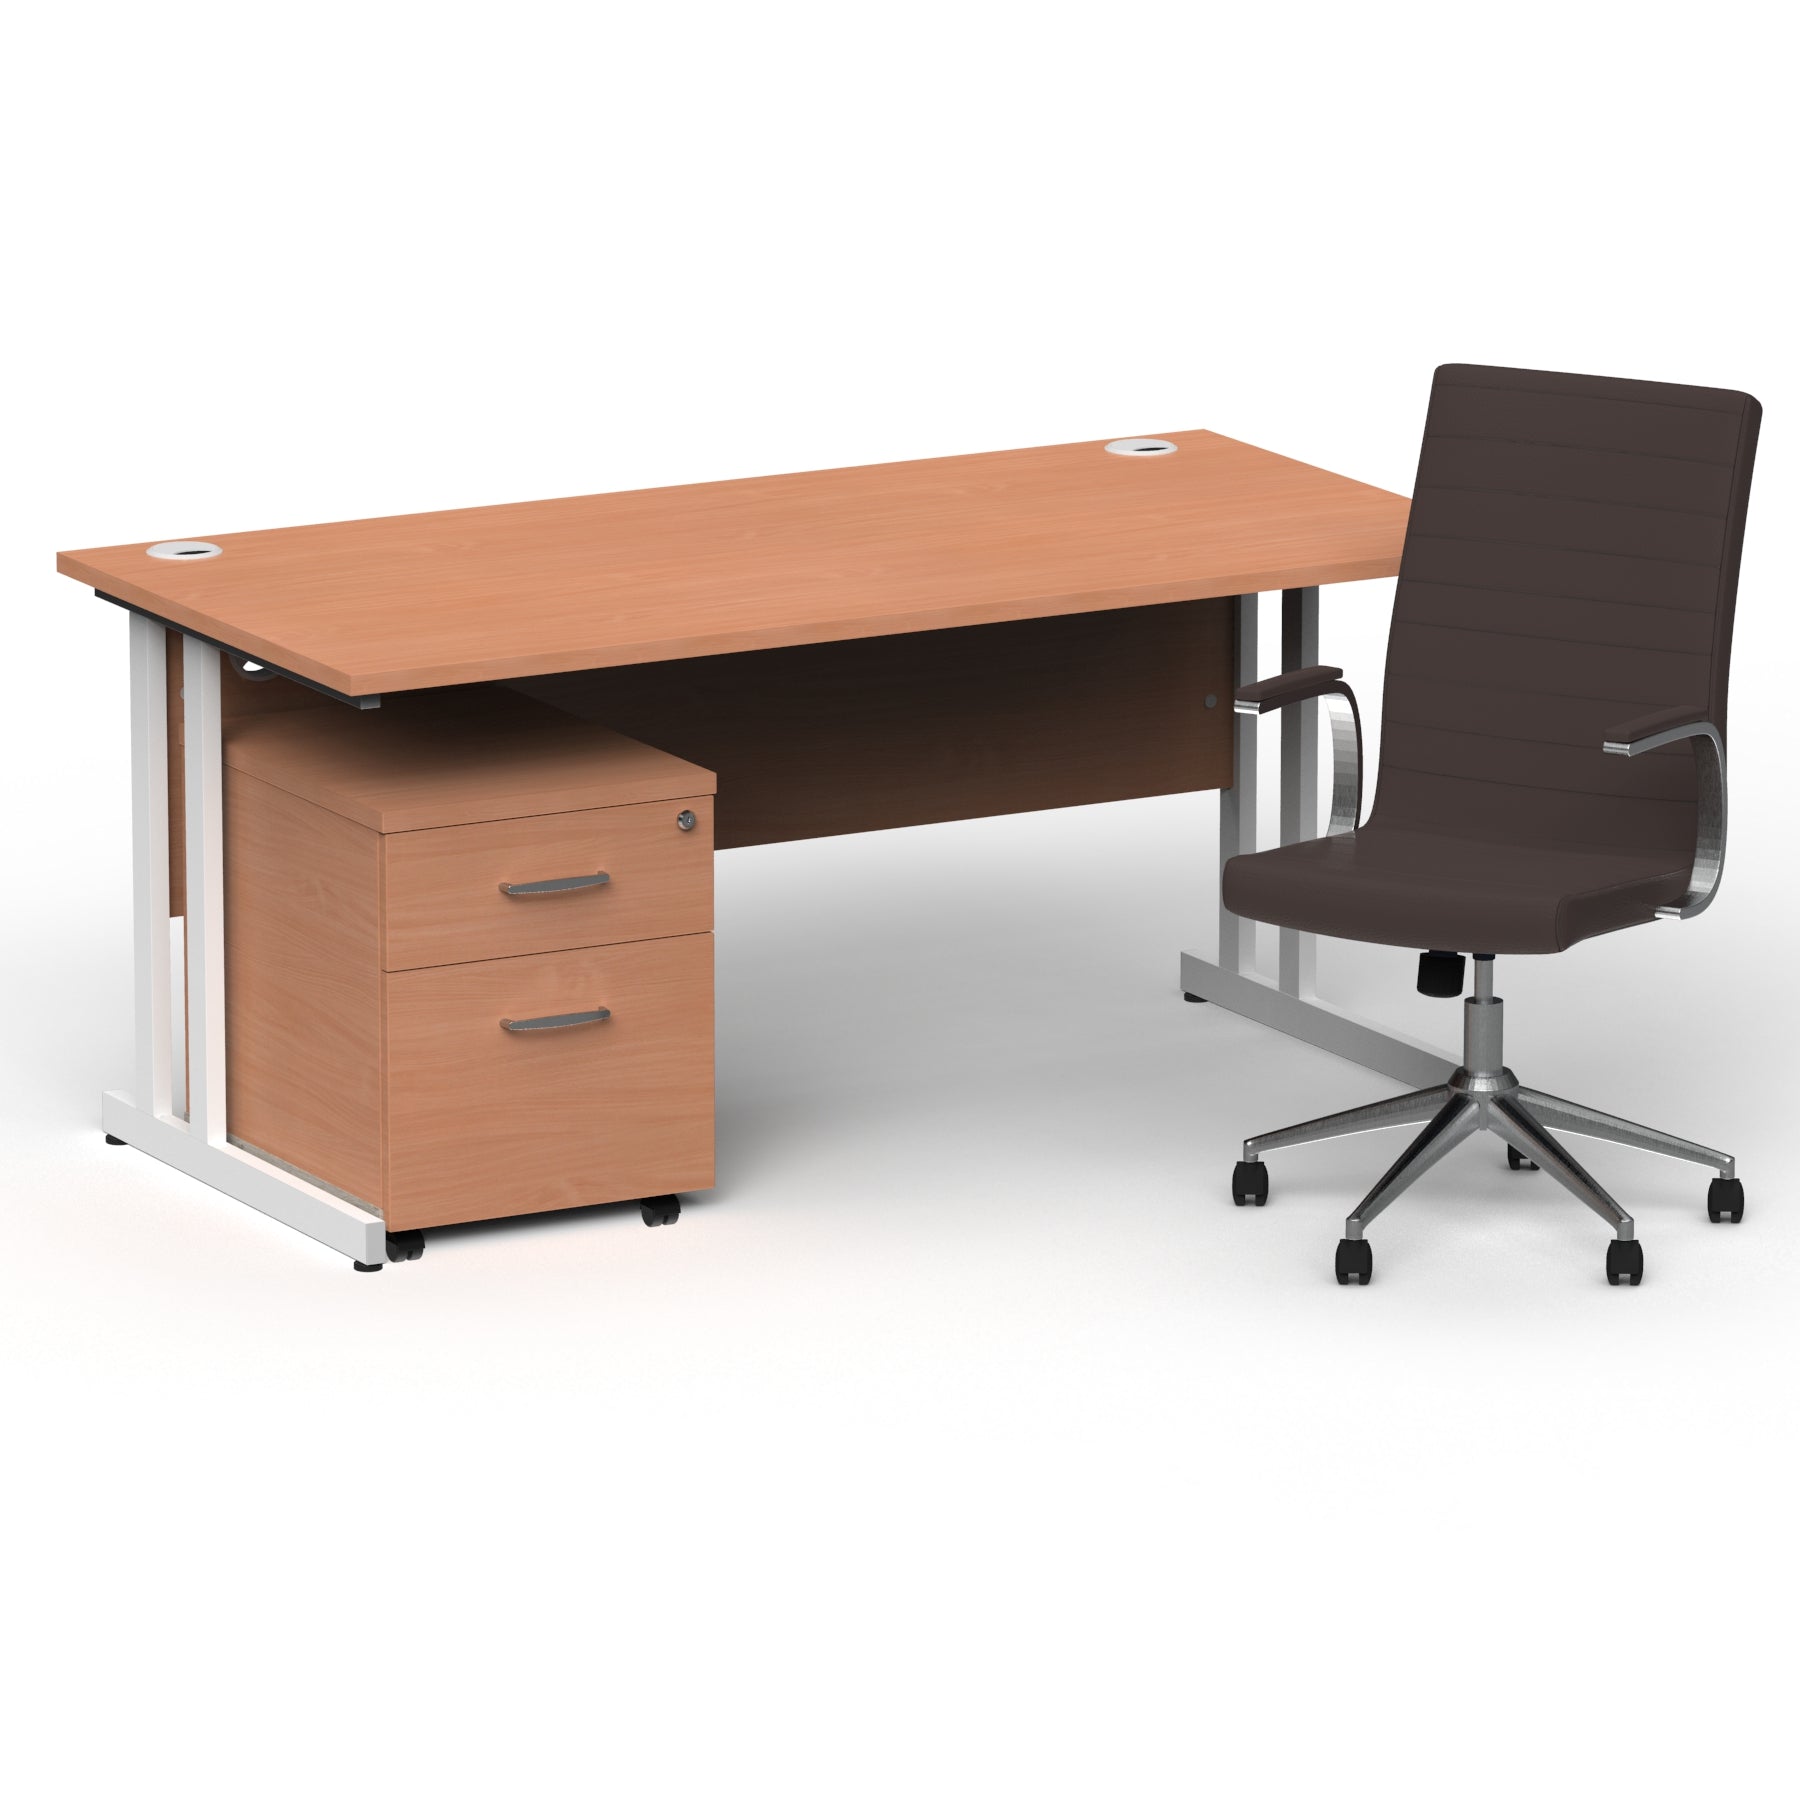 Impulse 1600mm Cantilever Straight Desk & Mobile Pedestal with Ezra Brown Executive Chair - 5-Year Furniture Guarantee, 2-Year Seating Guarantee